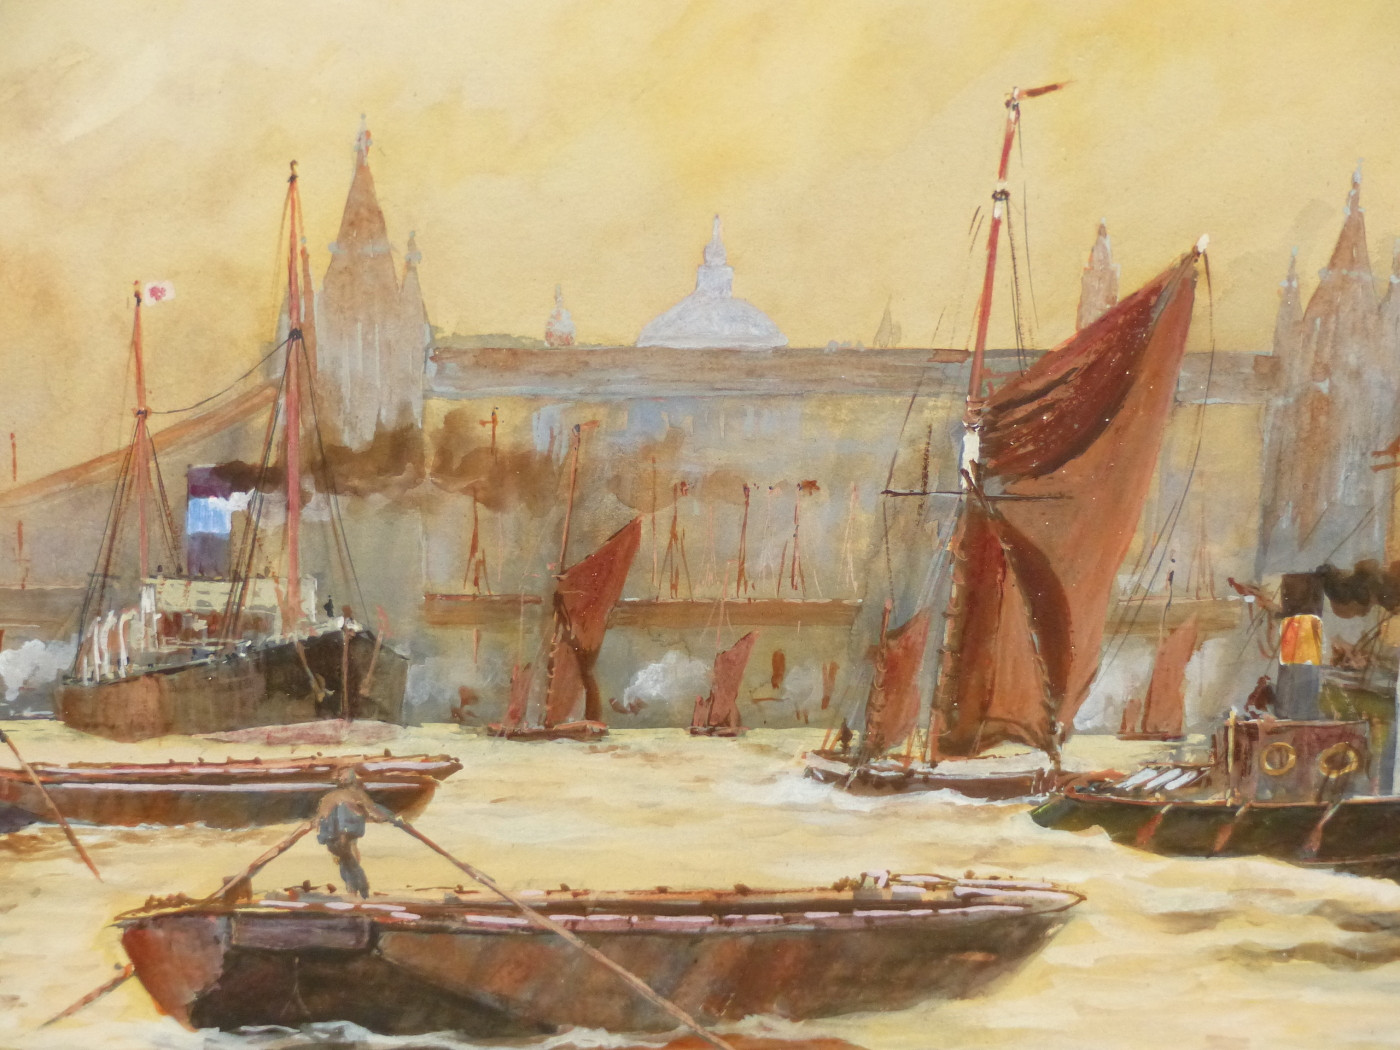 H. FOSTER (19th/20th.C. ENGLISH SCHOOL). THE POOL OF LONDON. SIGNED AND DATED 1907, WATERCOLOUR. - Image 4 of 7